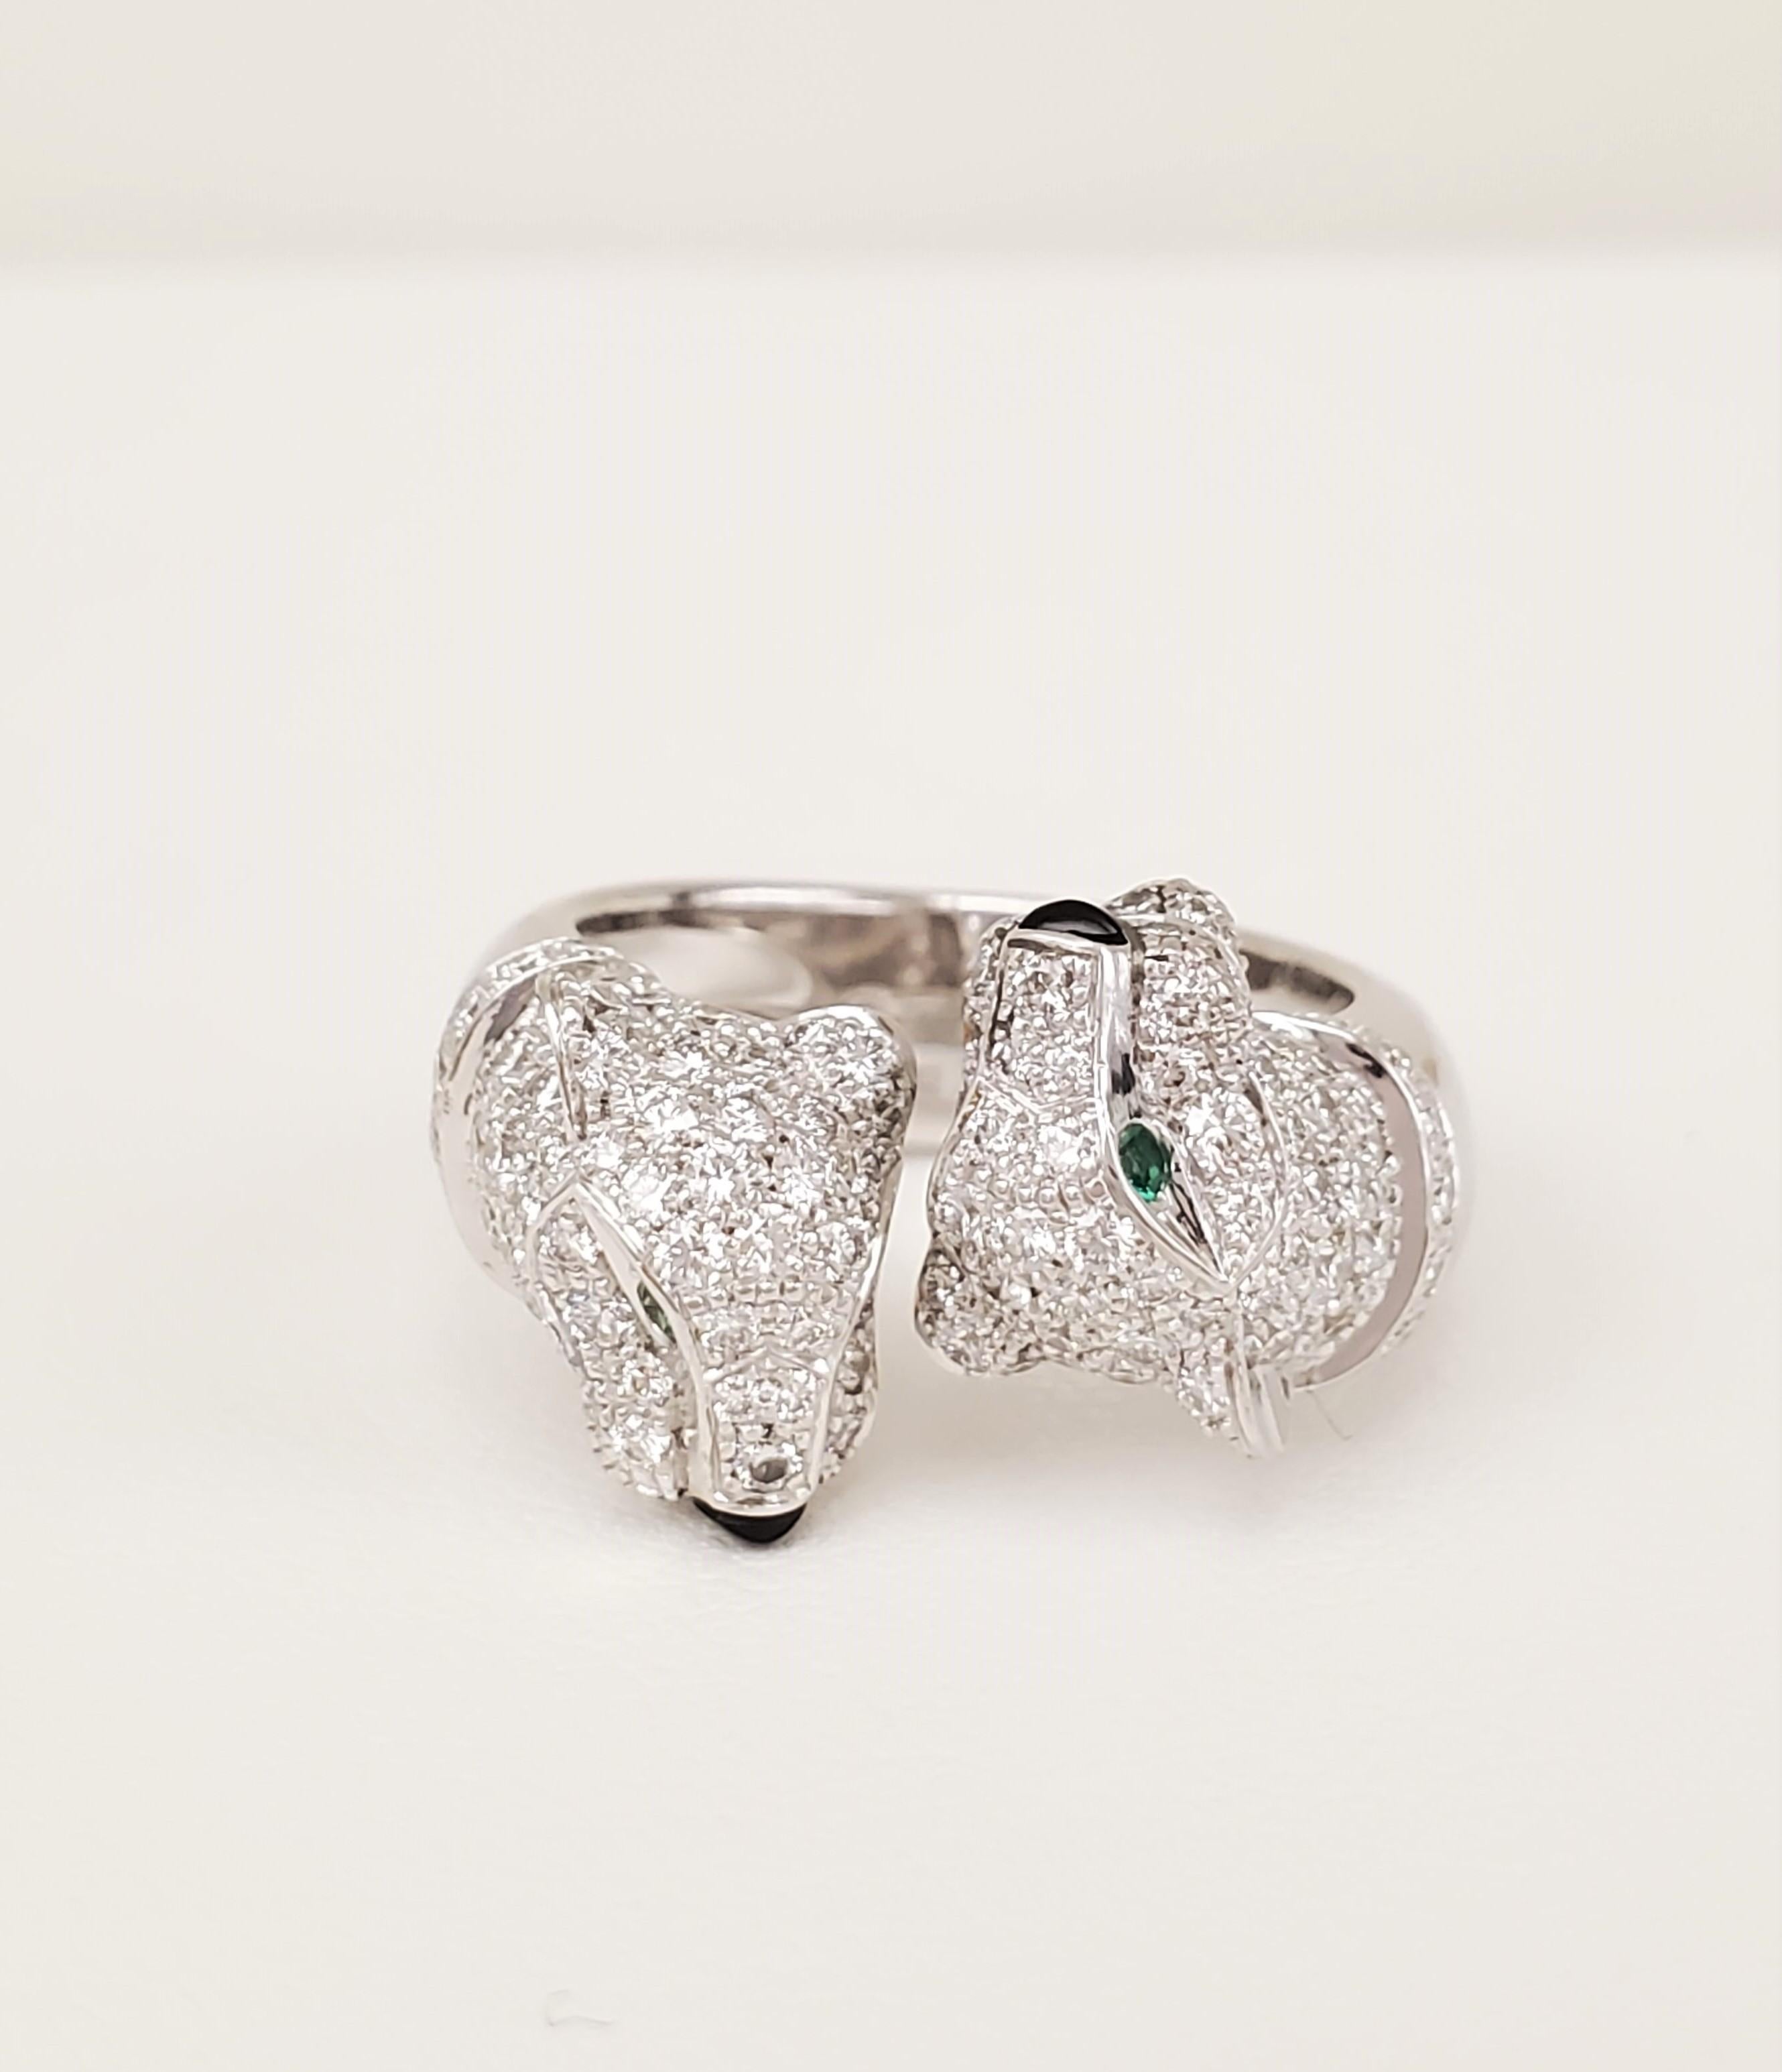 Authentic rare Cartier ring from the Panthere collection centering on two opposing panther heads. The ring is crafted in 18 karat white gold and set with approximately 1.25 carats of round brilliant cut diamonds (E-F color, VS clarity). The panther